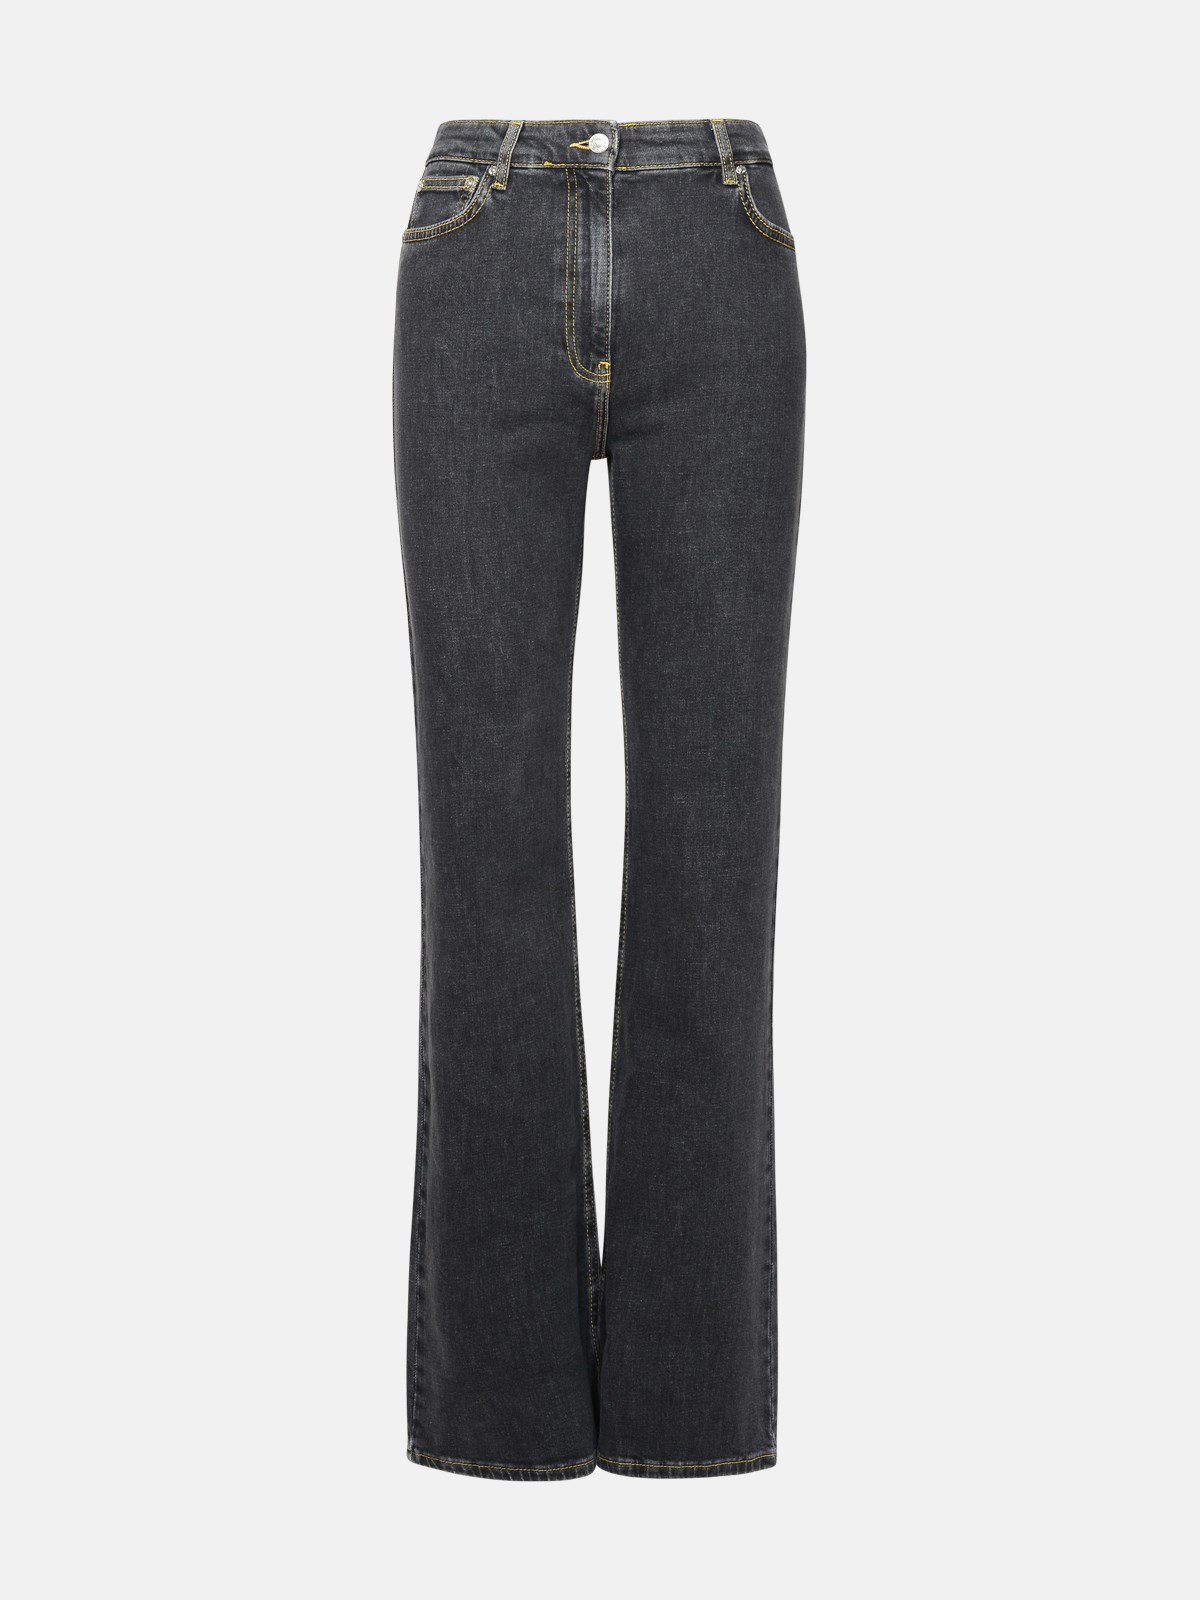 Moschino Jeans Black Cotton Jeans